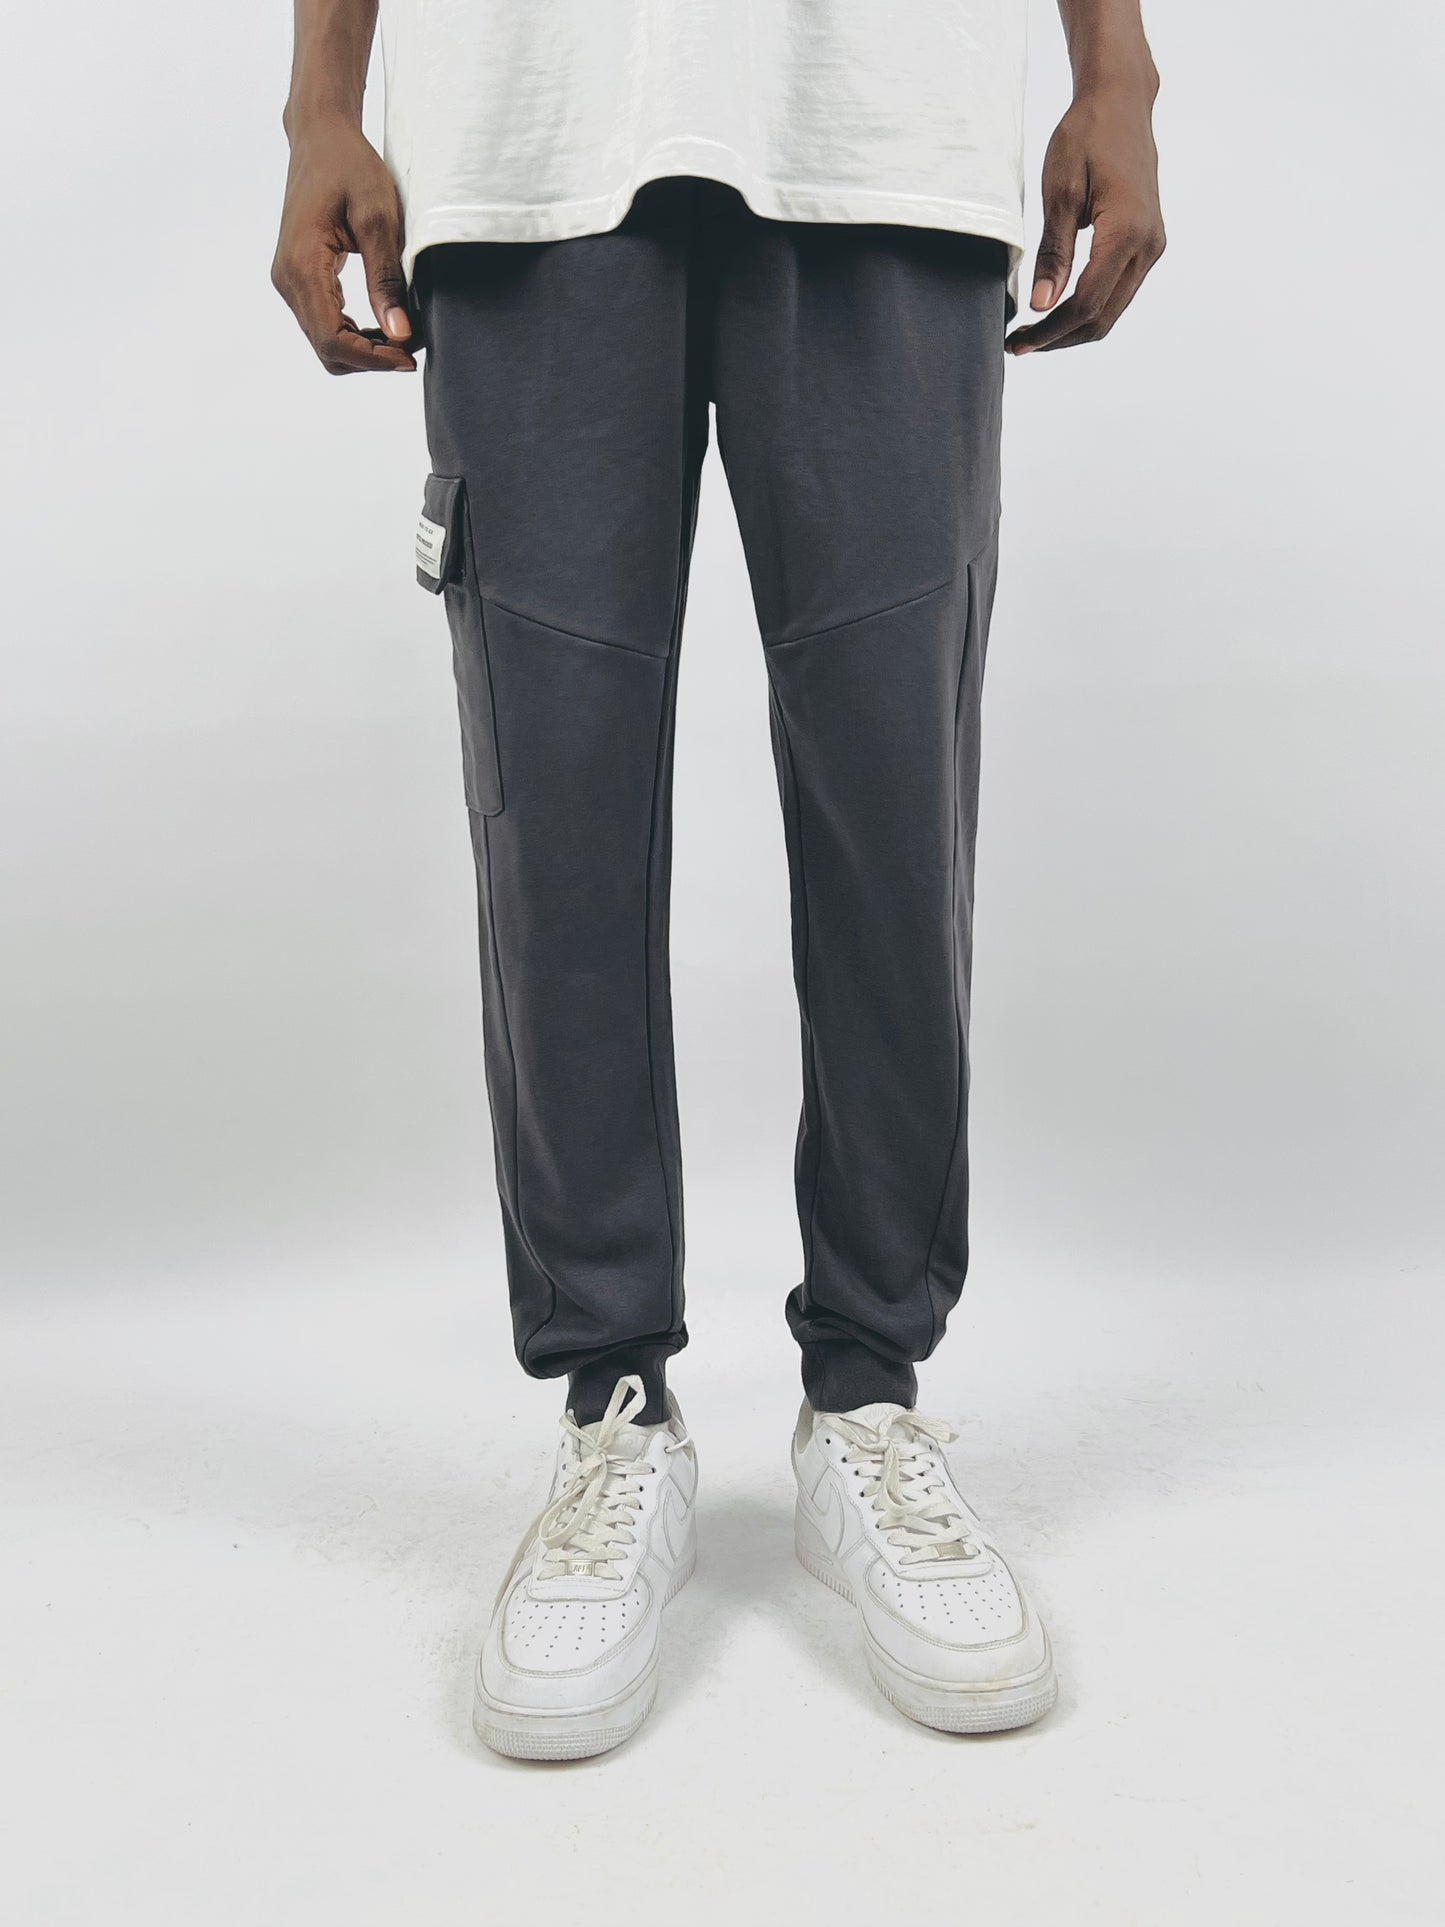 LCW Casual cargo pocket jogger pants in charcoal